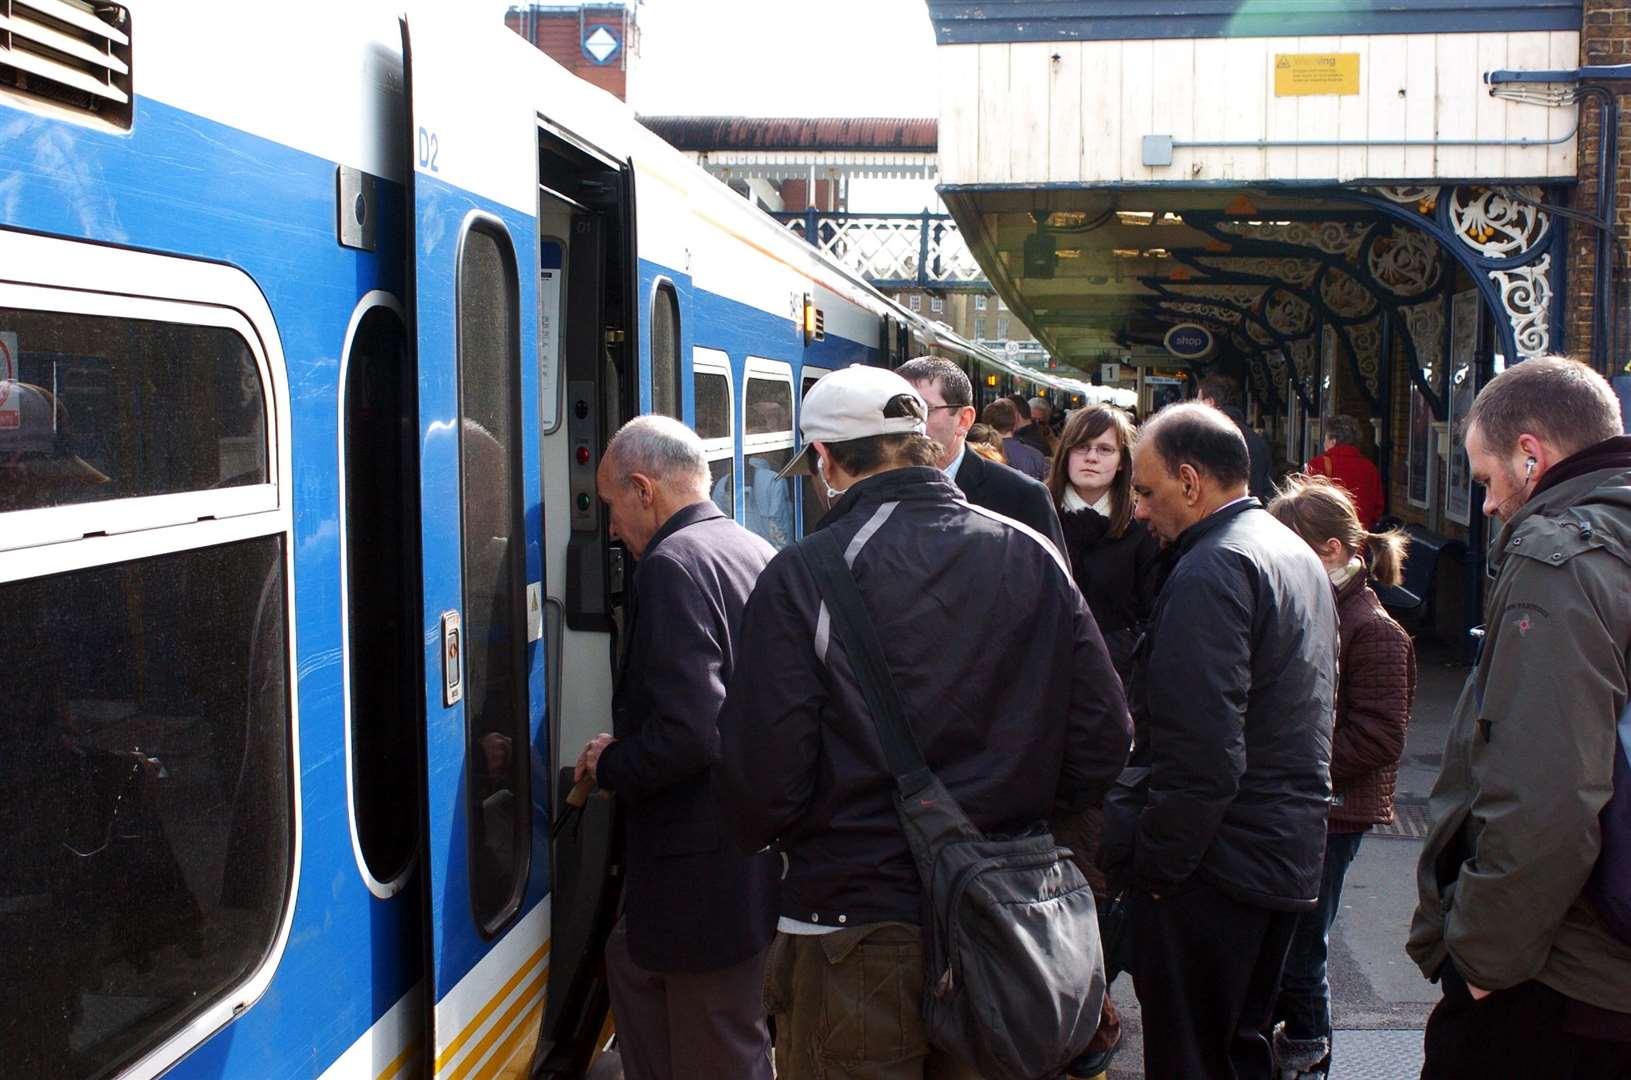 More commuters are dissatisfied with Southeastern train services